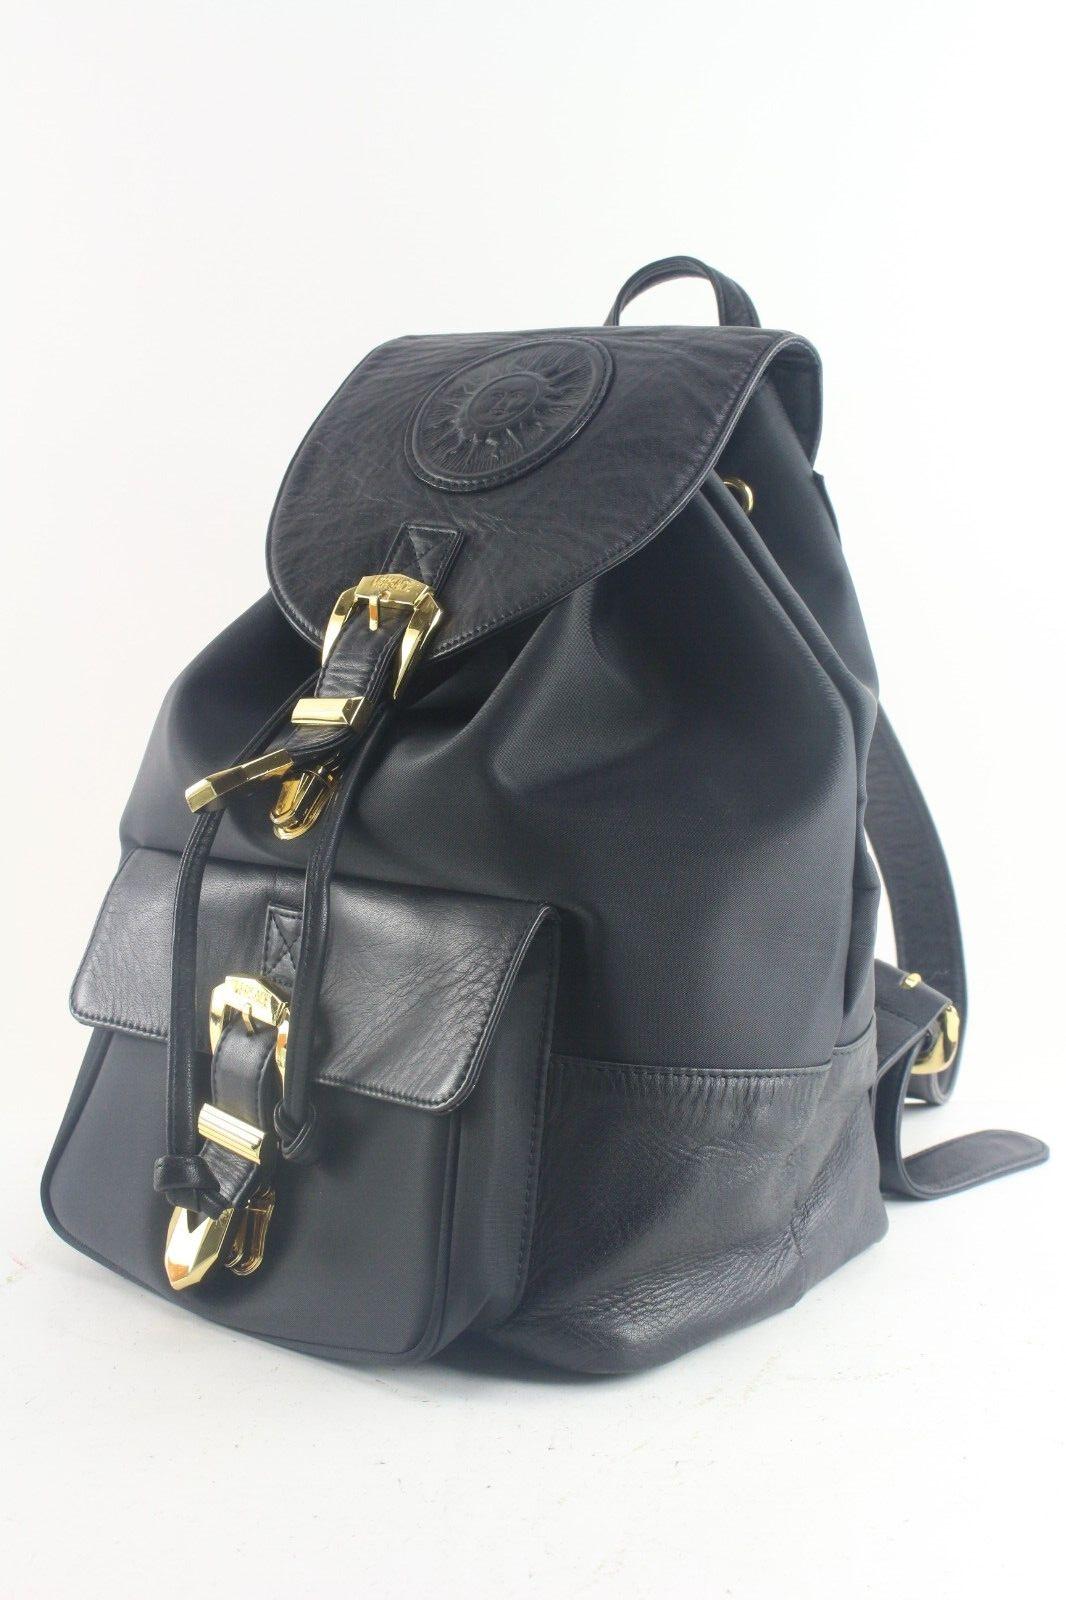 Gianni Versace Leather Backpack 2GV918K For Sale 7